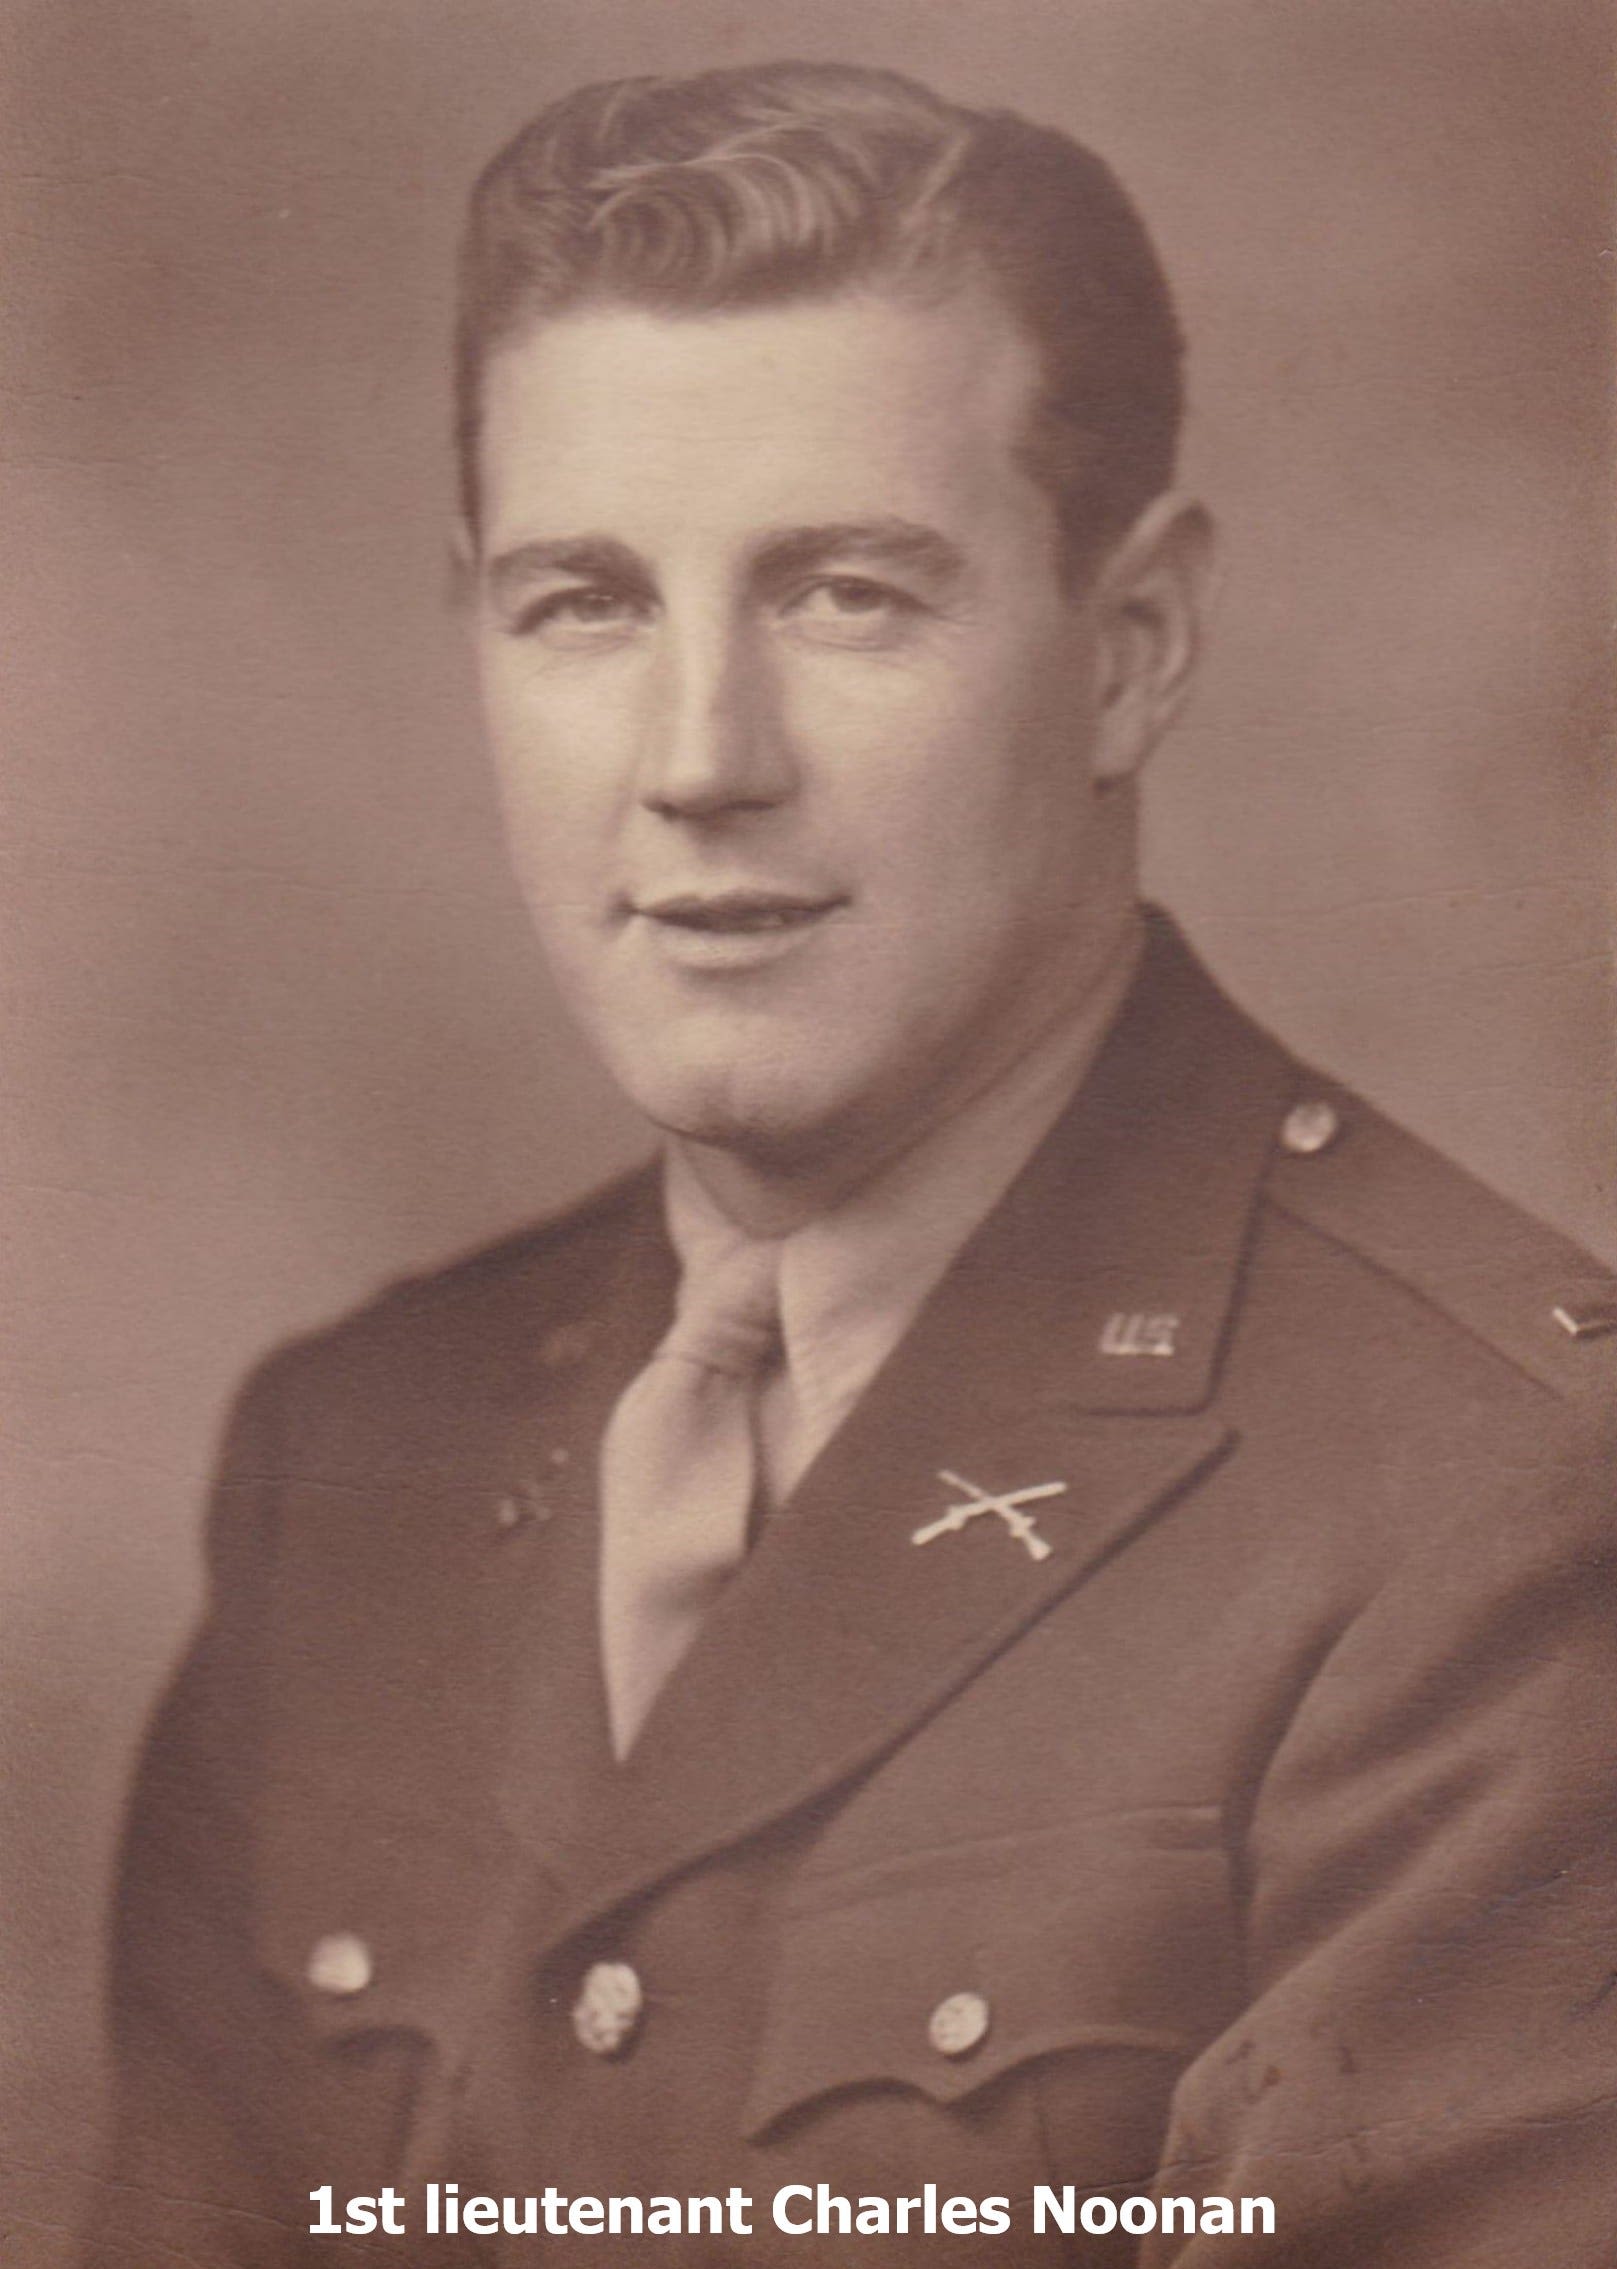 D-Day at 80: This Delaware man led a platoon in the invasion of Normandy on June 6, 1944